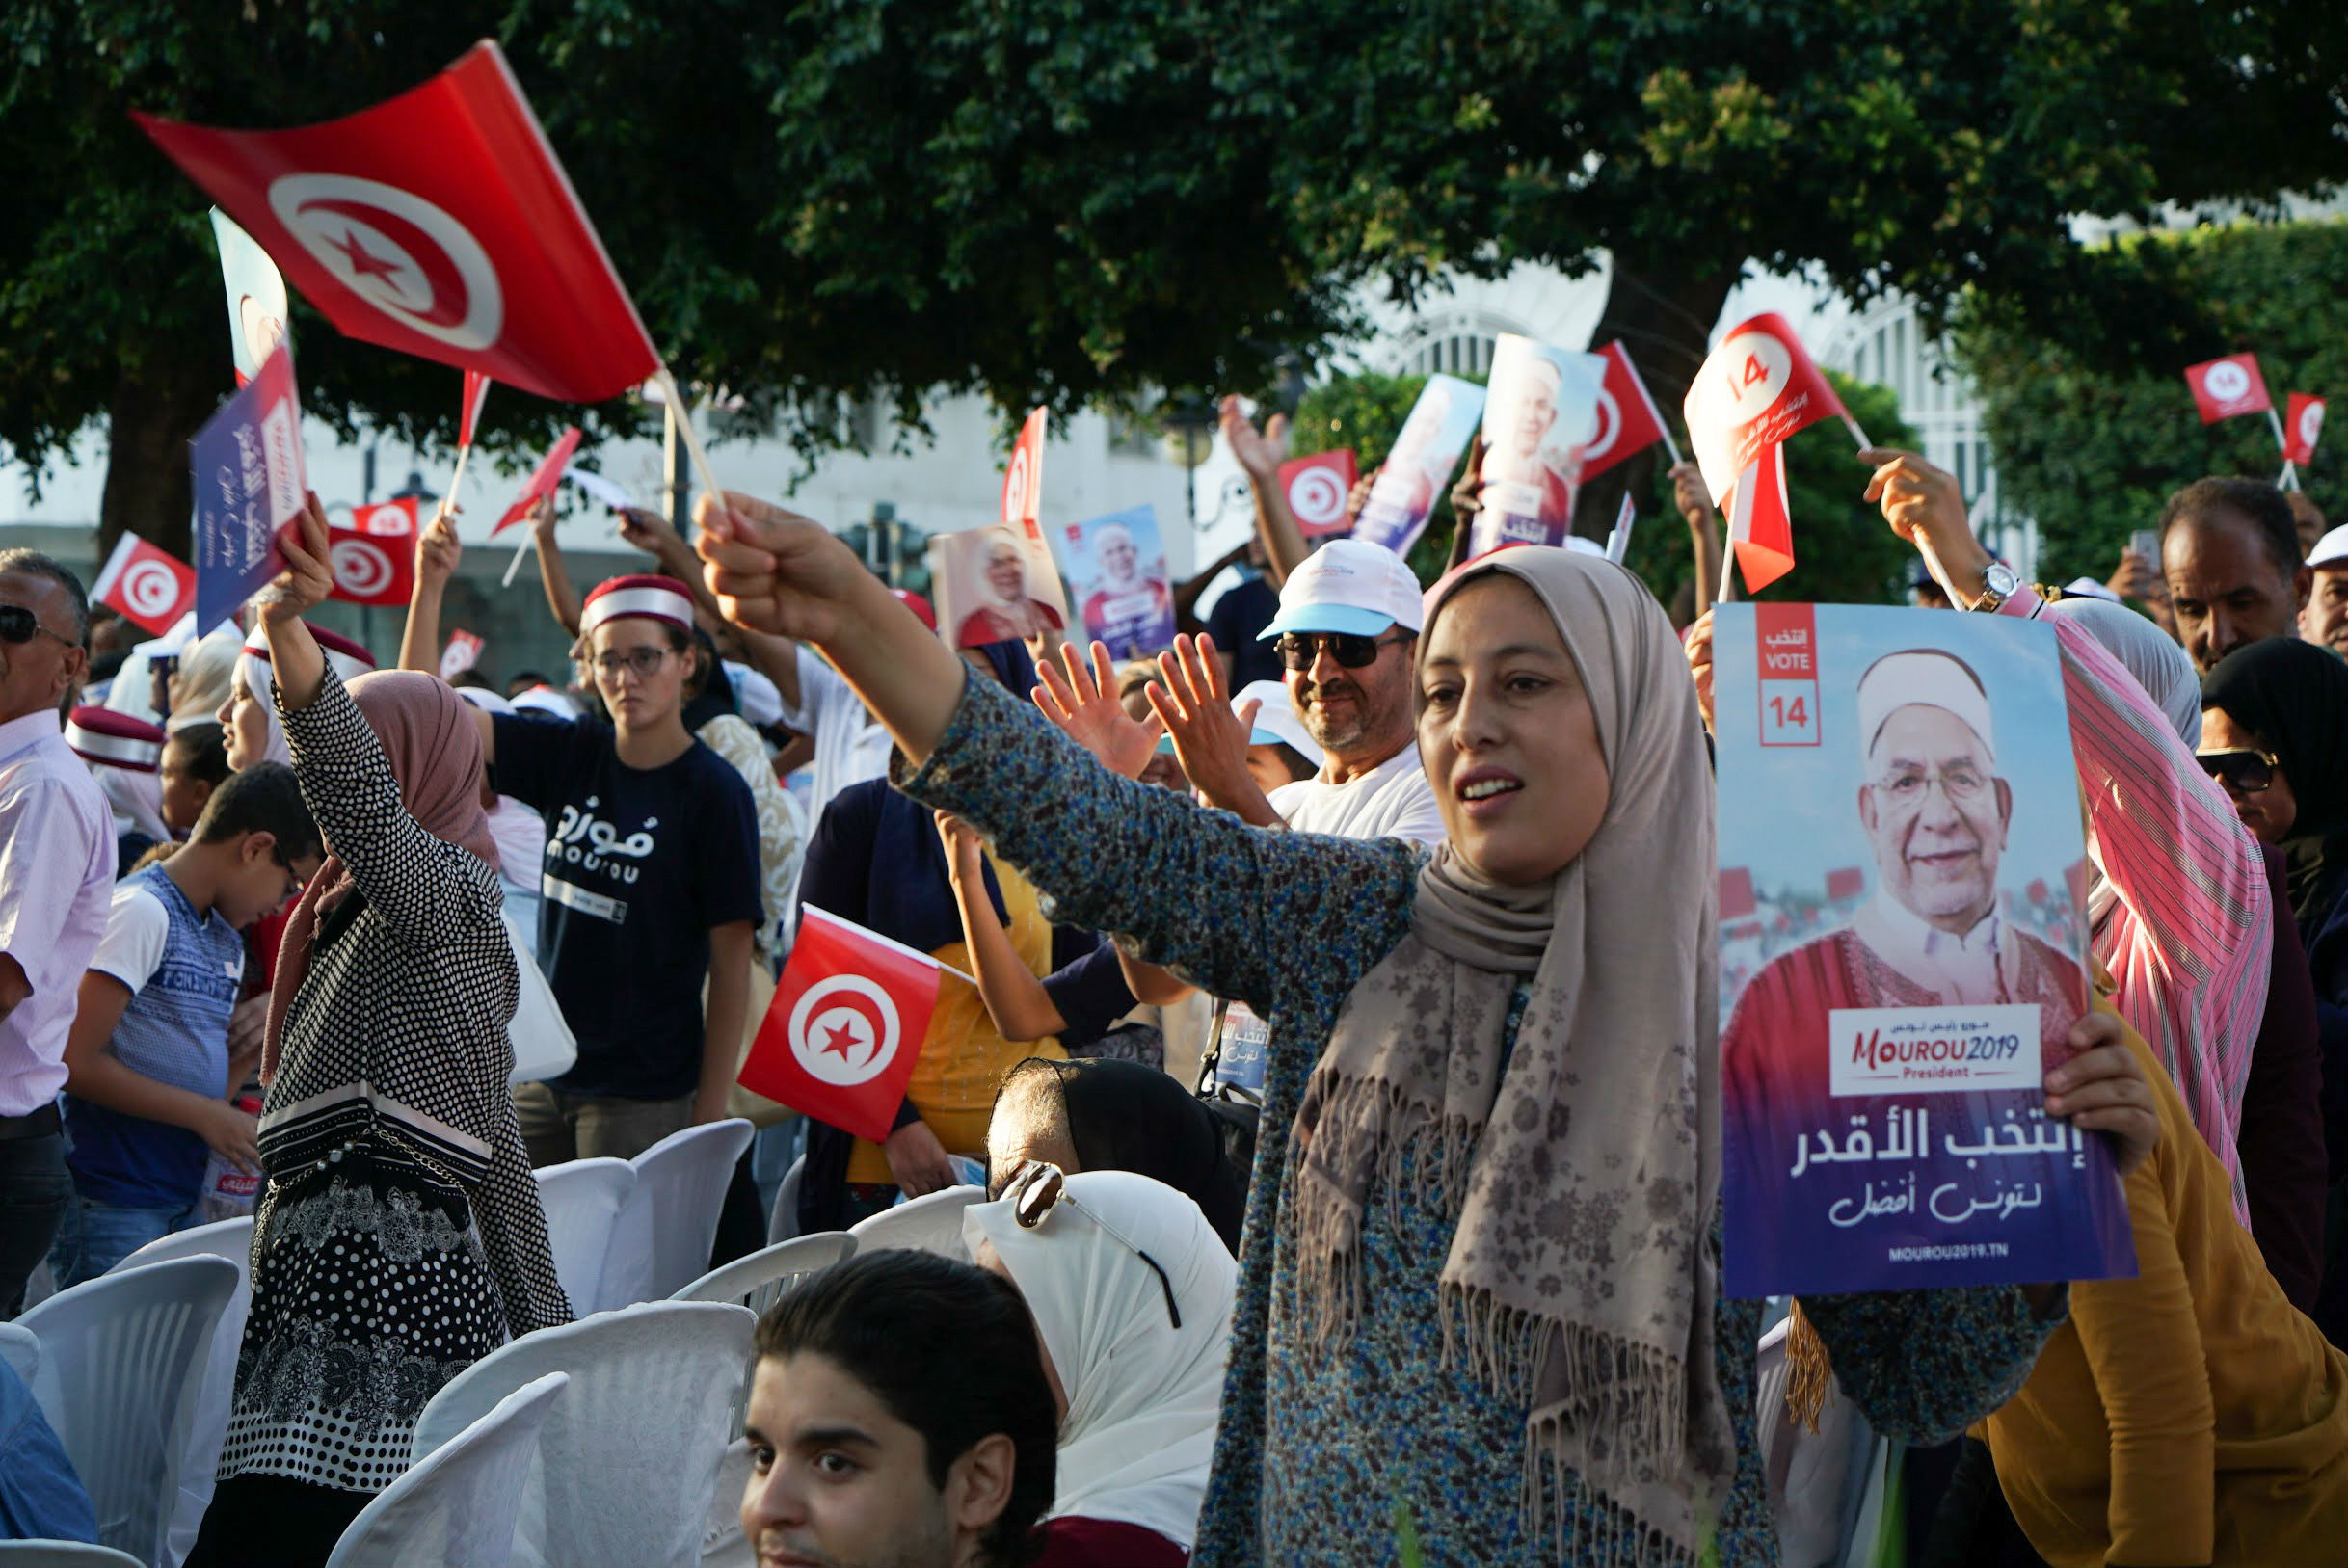 Supporters of Abdelfattah Mourou, Ennahdha's candidate, see at a rally in Tunis (MEE/Faisal Edroos)